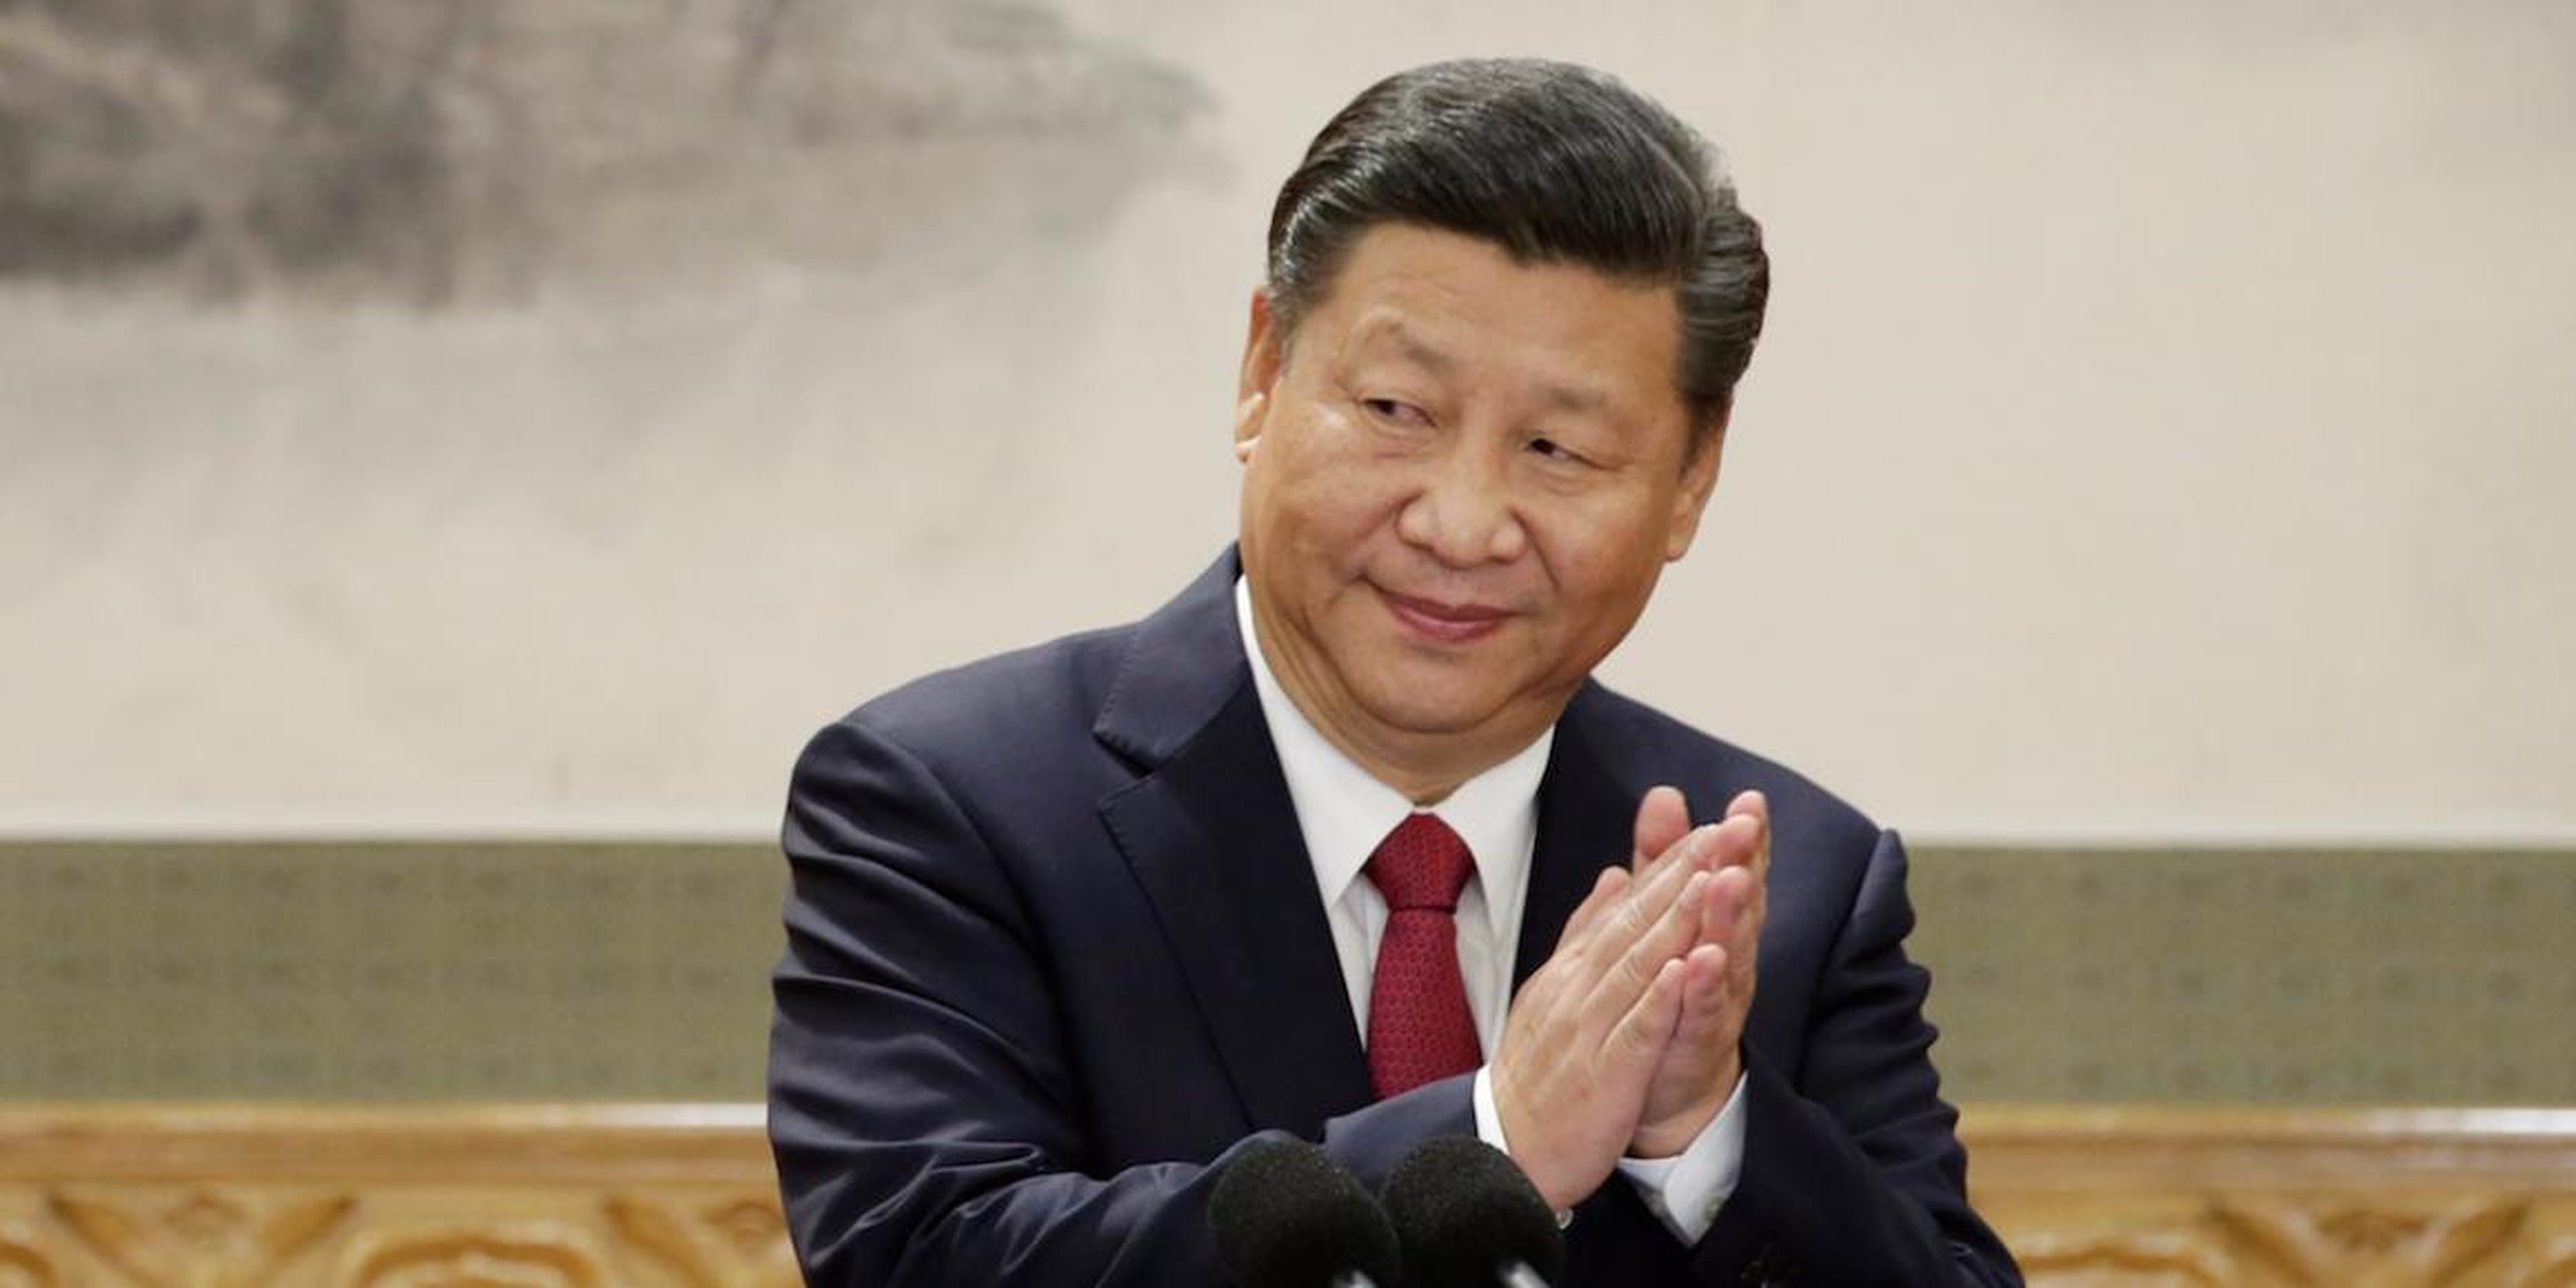 China, under President Xi Jinping, could be trying to pit EU countries against one another to prevent the bloc from having one united policy that could hamper Beijing's trade plans.